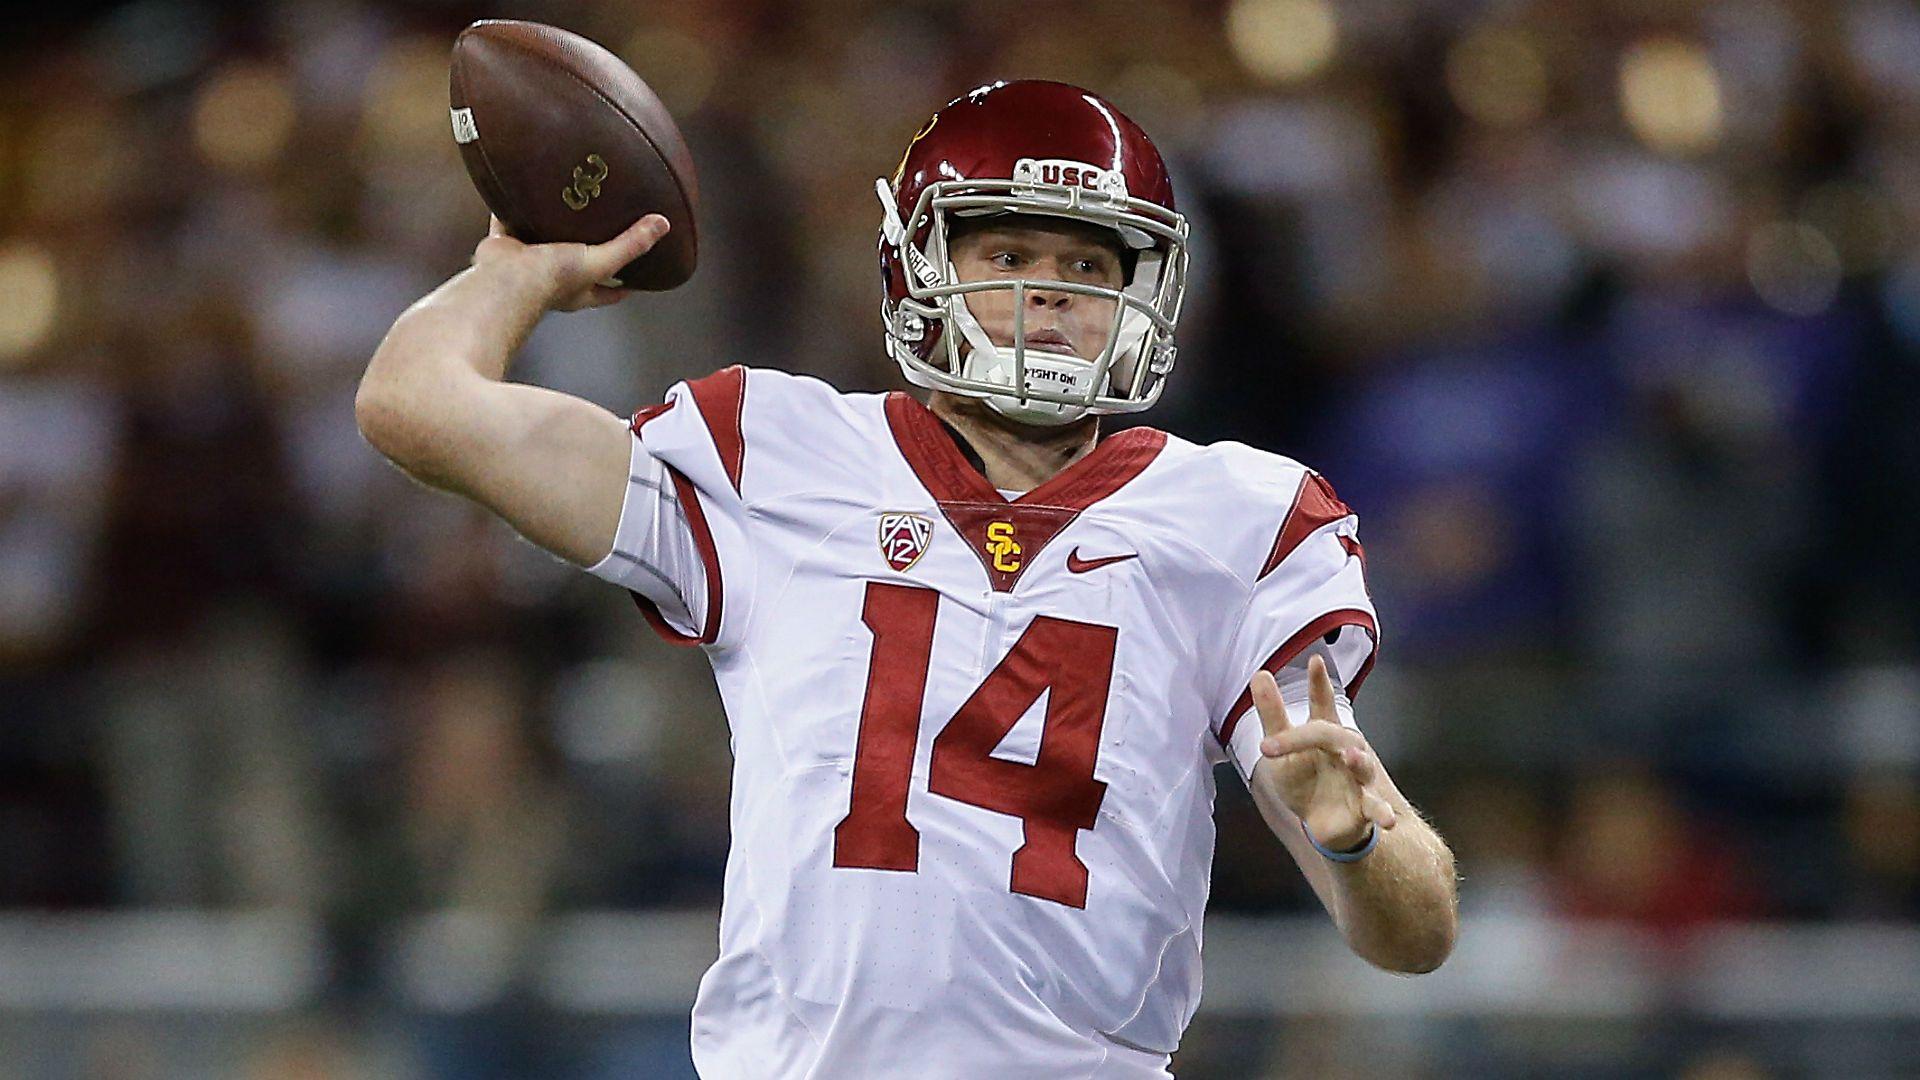 NFL Draft: What would happen if Sam Darnold were to stay at